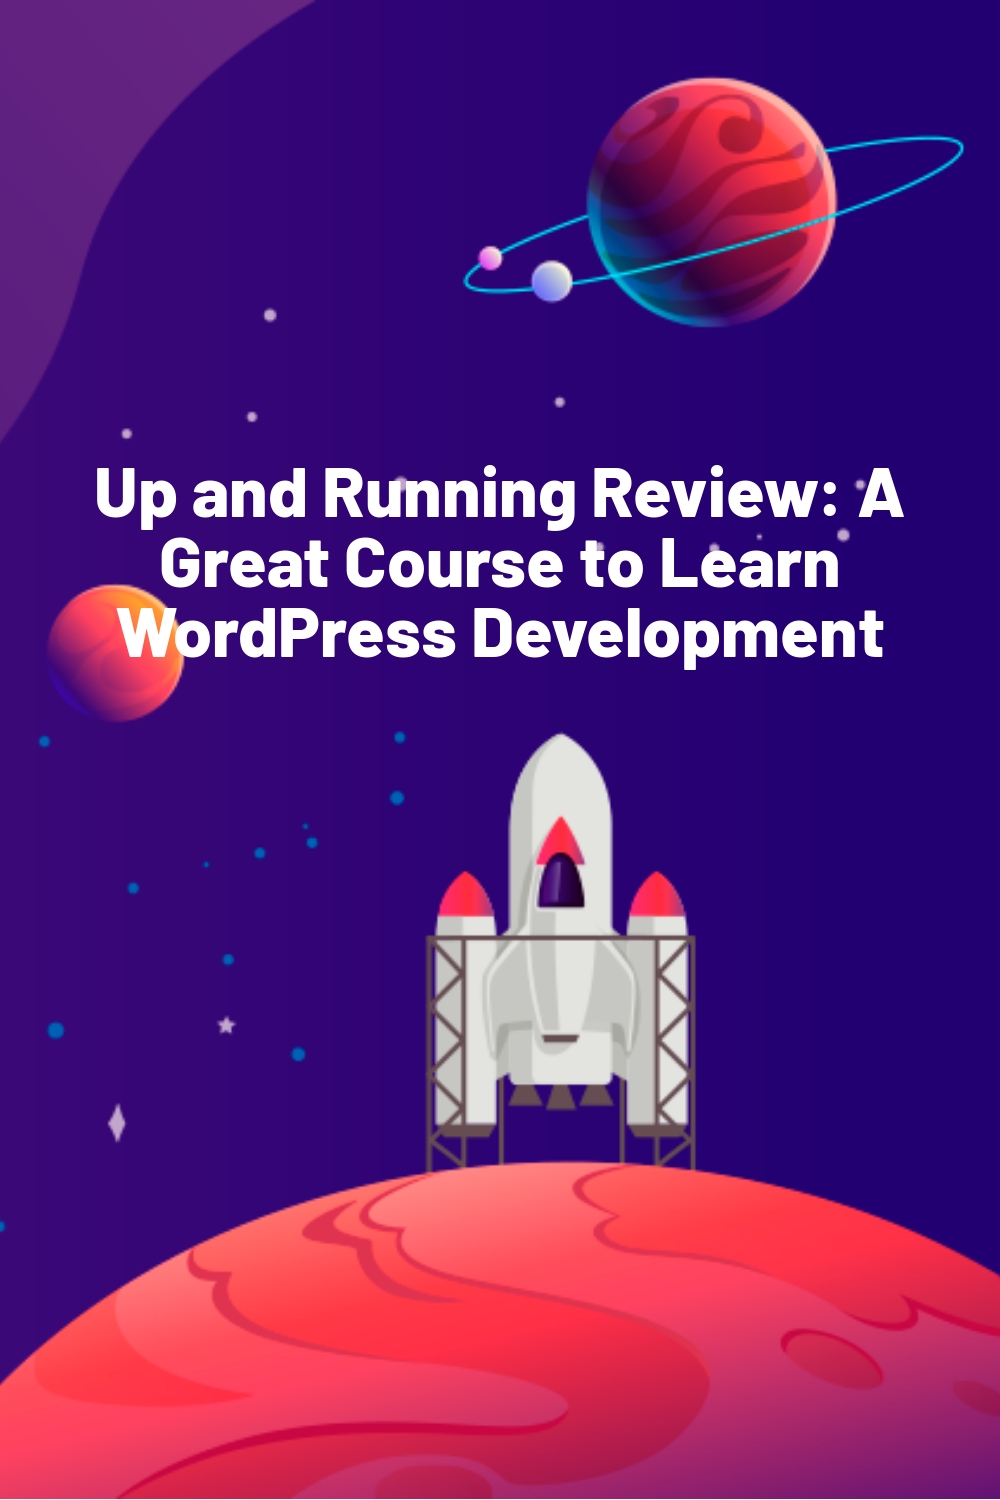 Up and Running Review: A Great Course to Learn WordPress Development